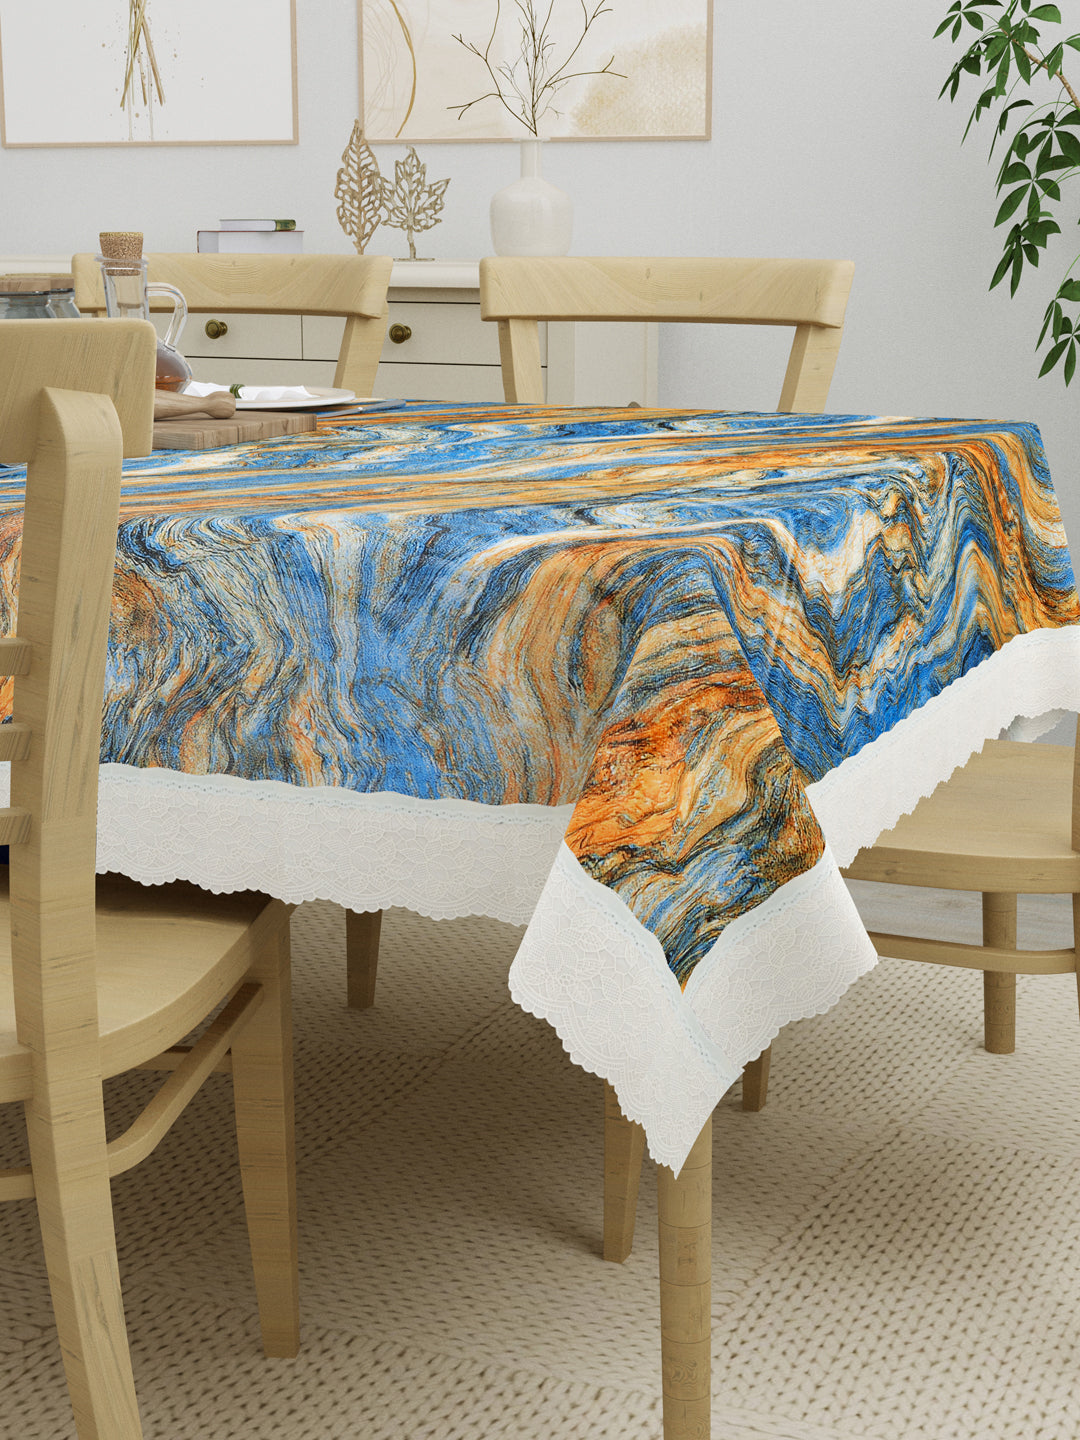 6 Seater Dining Table Cover; Material - PVC; Anti Slip; Blue & Golden Abstract